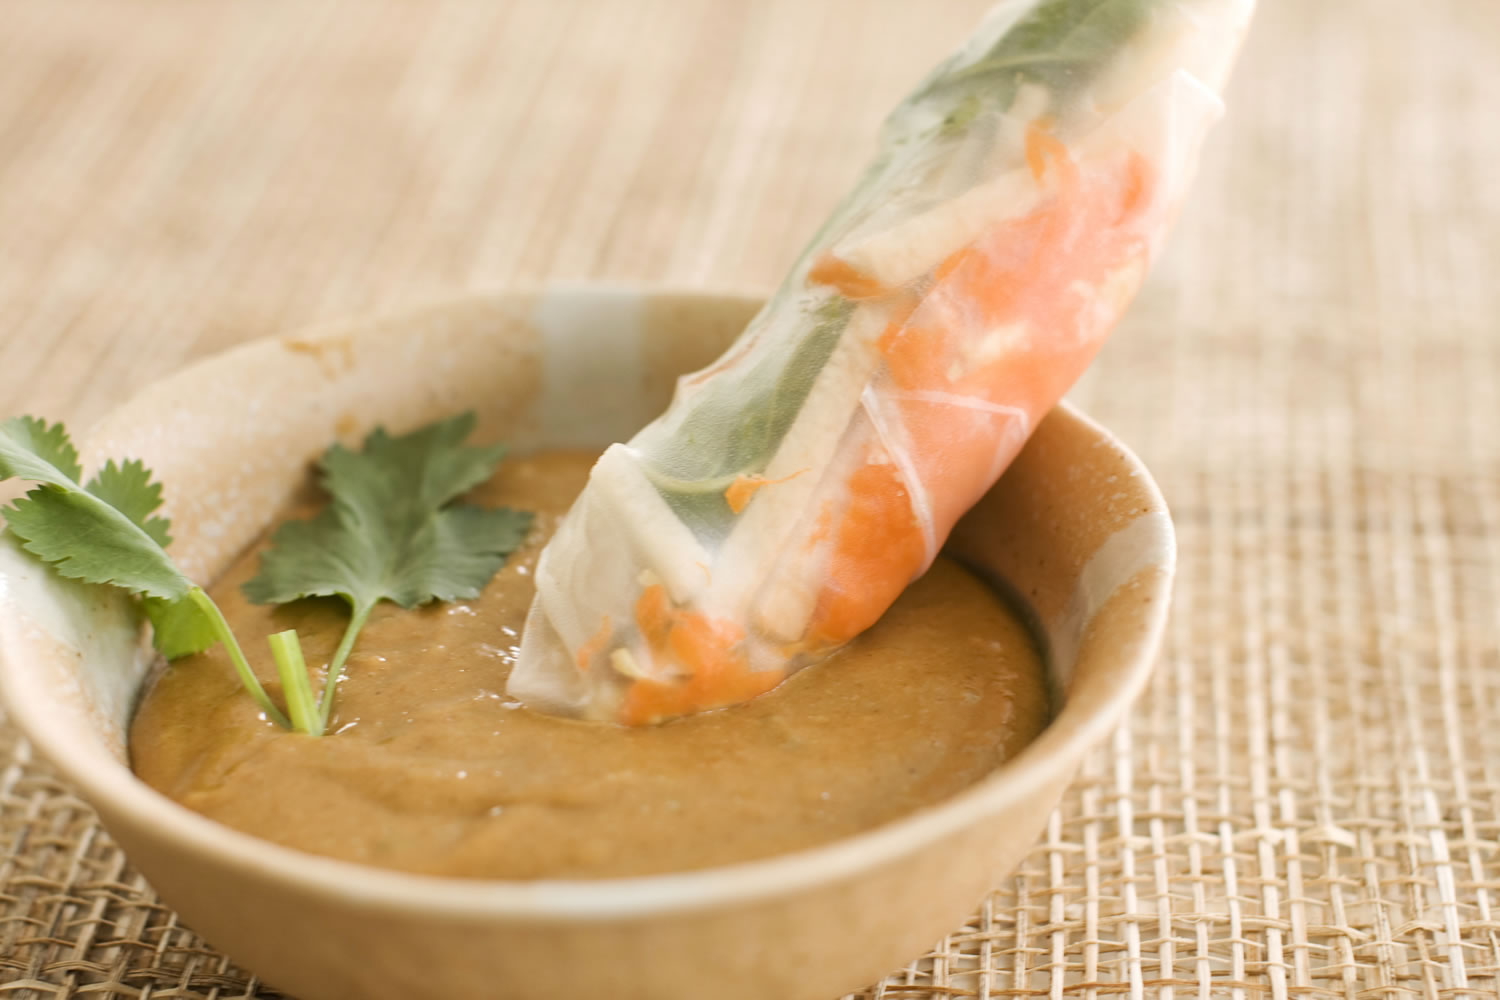 Spicy Peanut Dipping Sauce.